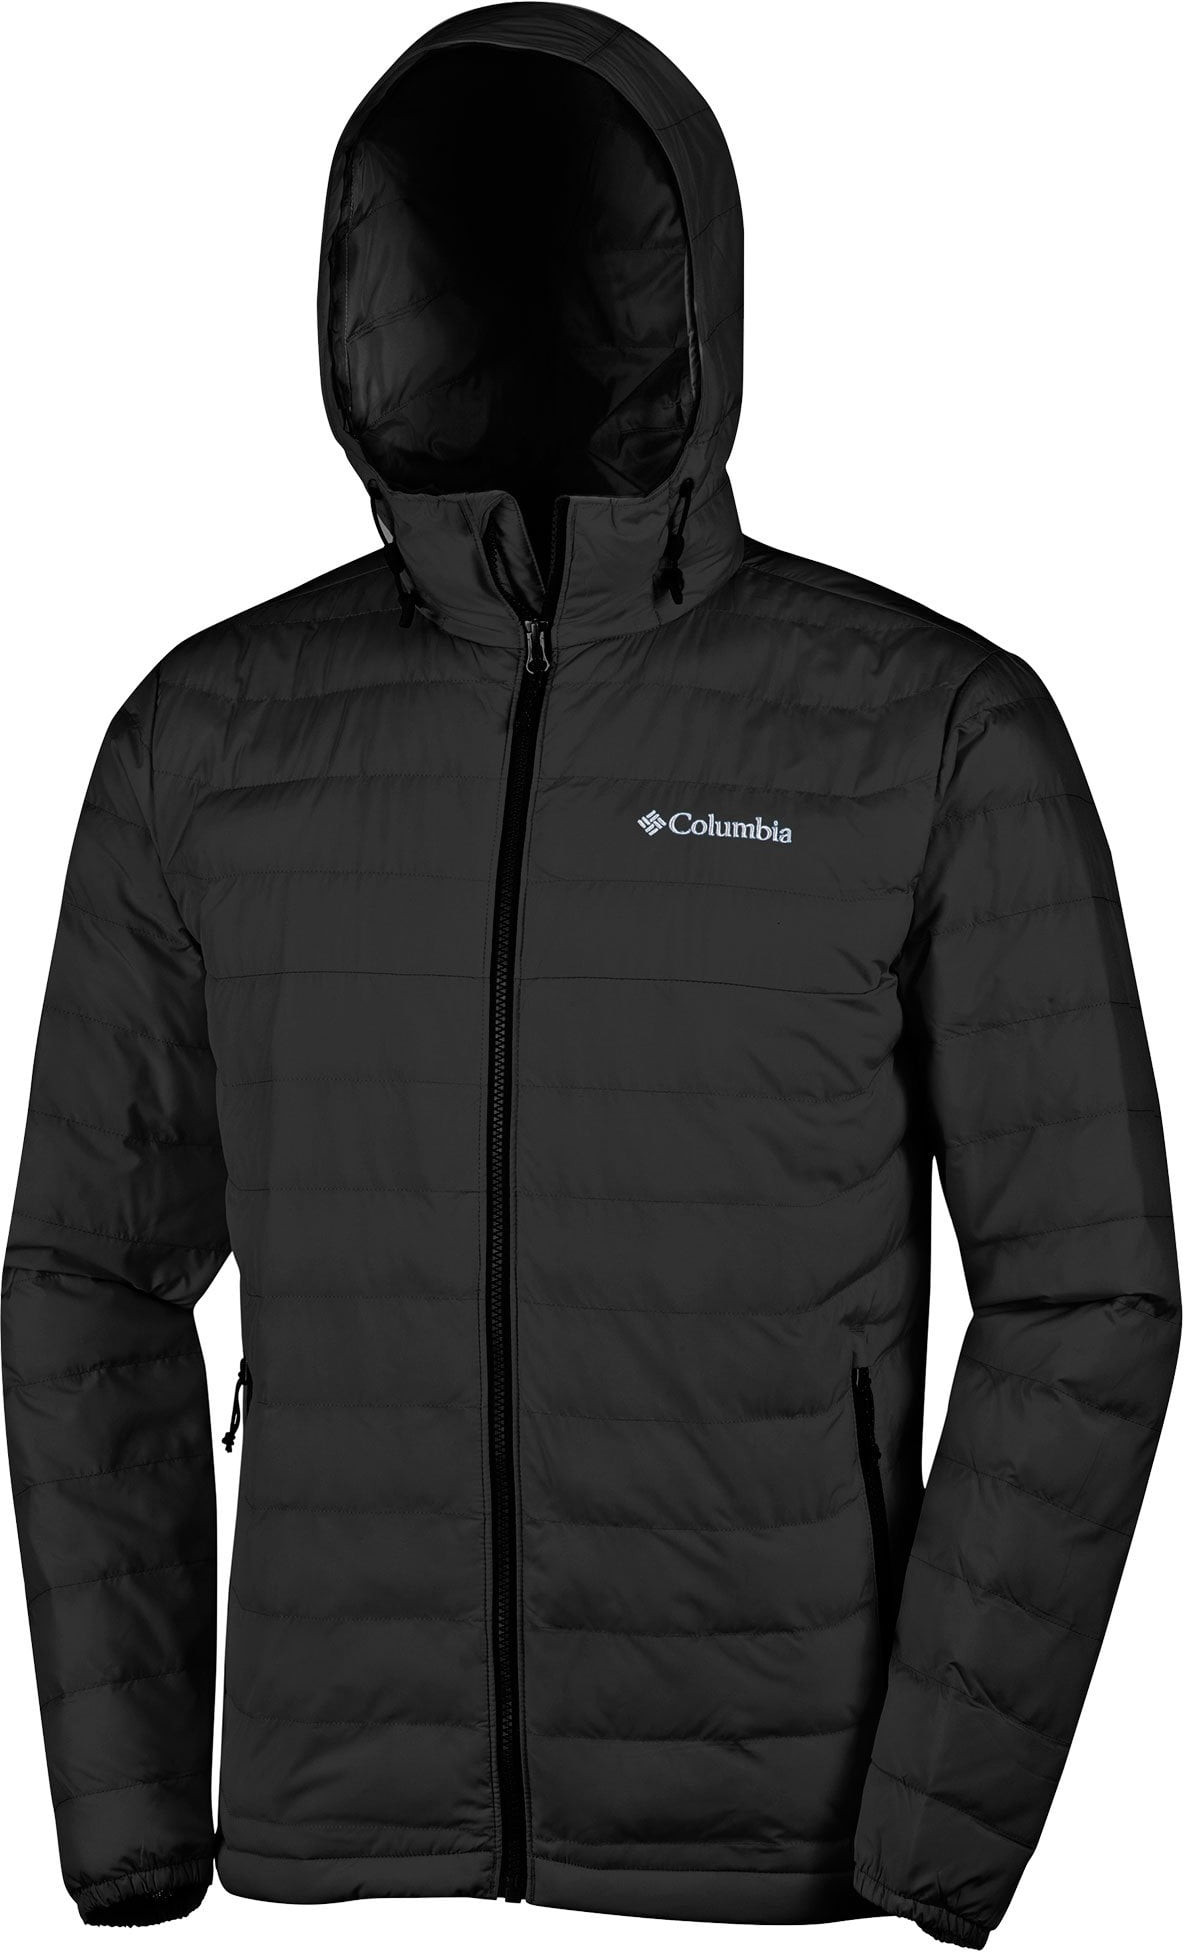 Unlock Wilderness' choice in the Canada Goose Vs Columbia comparison, the Powder Lite™ Hooded Insulated Jacket by Columbia